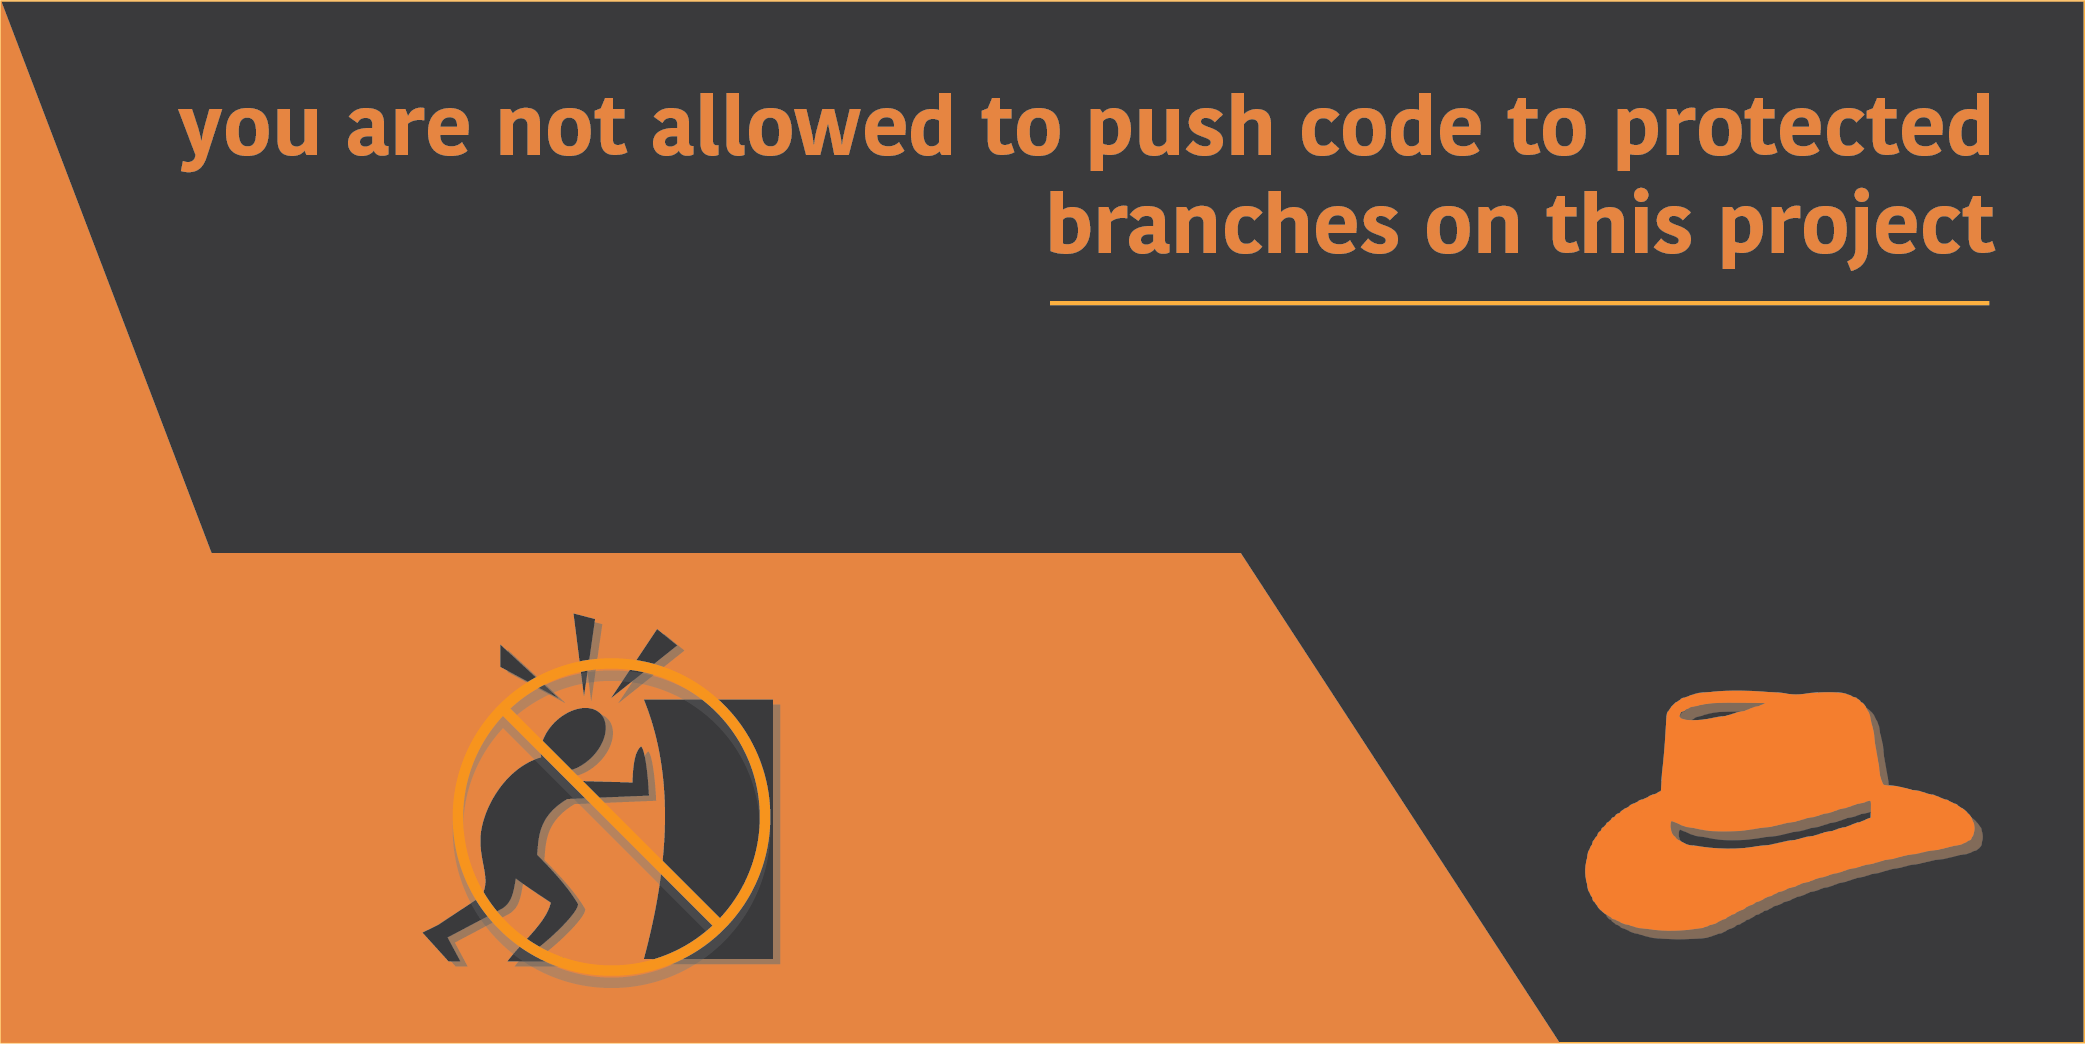 gitlab: you are not allowed to push code to protected branches on this project.